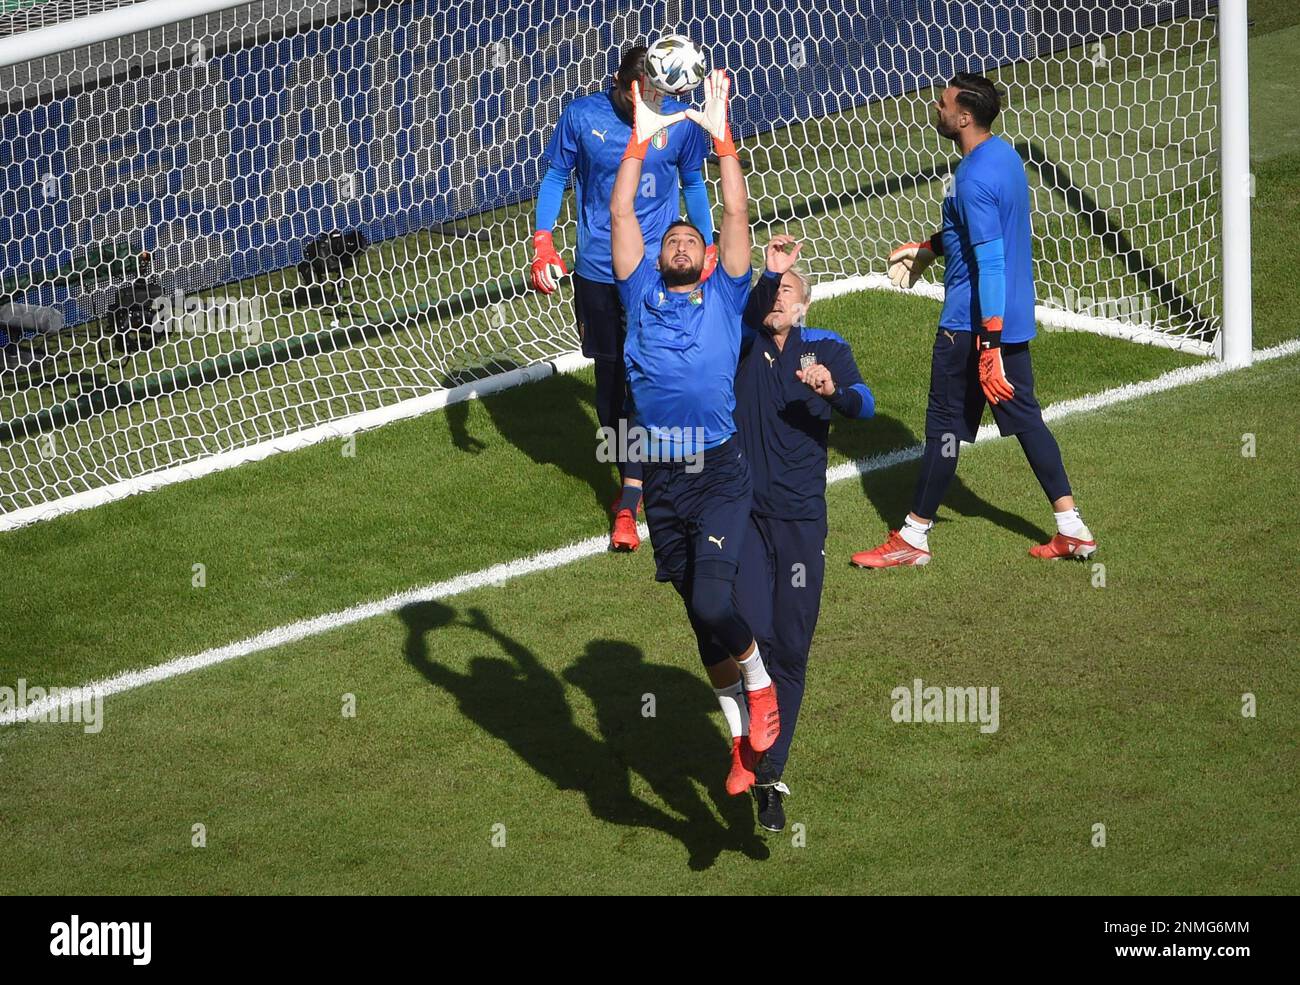 Italy players warm up prior to the UEFA Nations League third place soccer  match between Italy and Belgium at the Juventus stadium, in Turin, Italy,  Sunday, Oct. 10, 2021. (Massimo Rana/Pool Photo